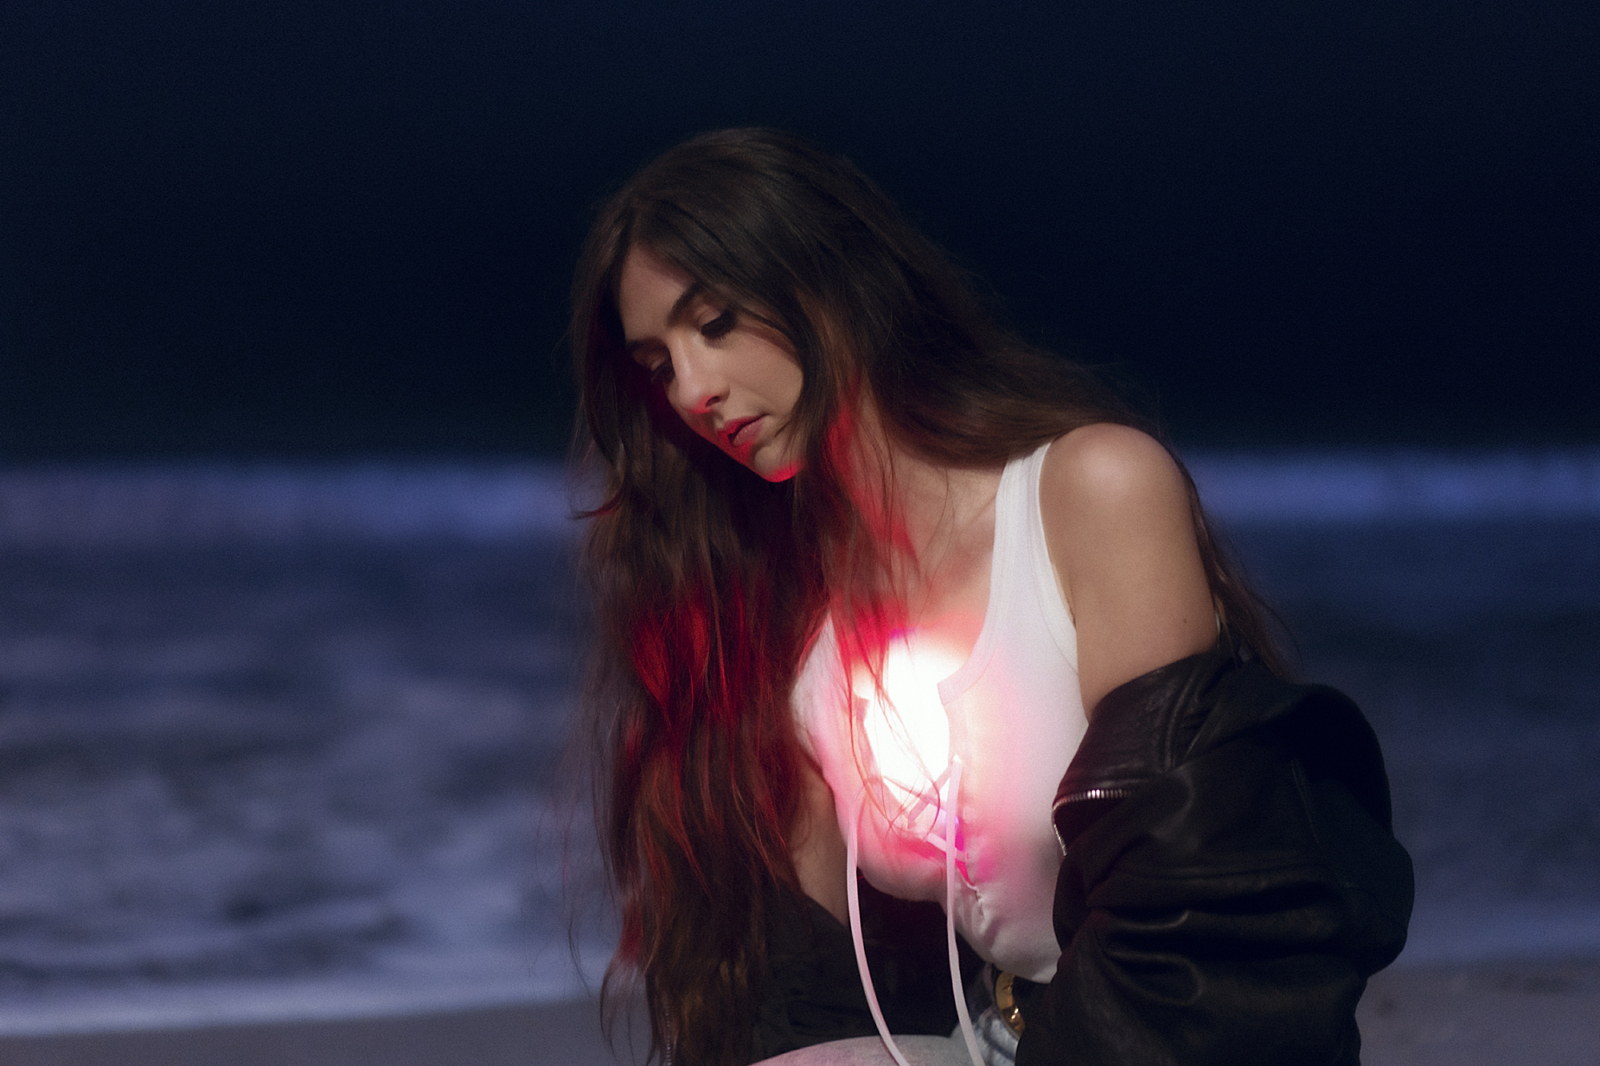 Weyes Blood announces new album 'And In The Darkness, Hearts Aglow'